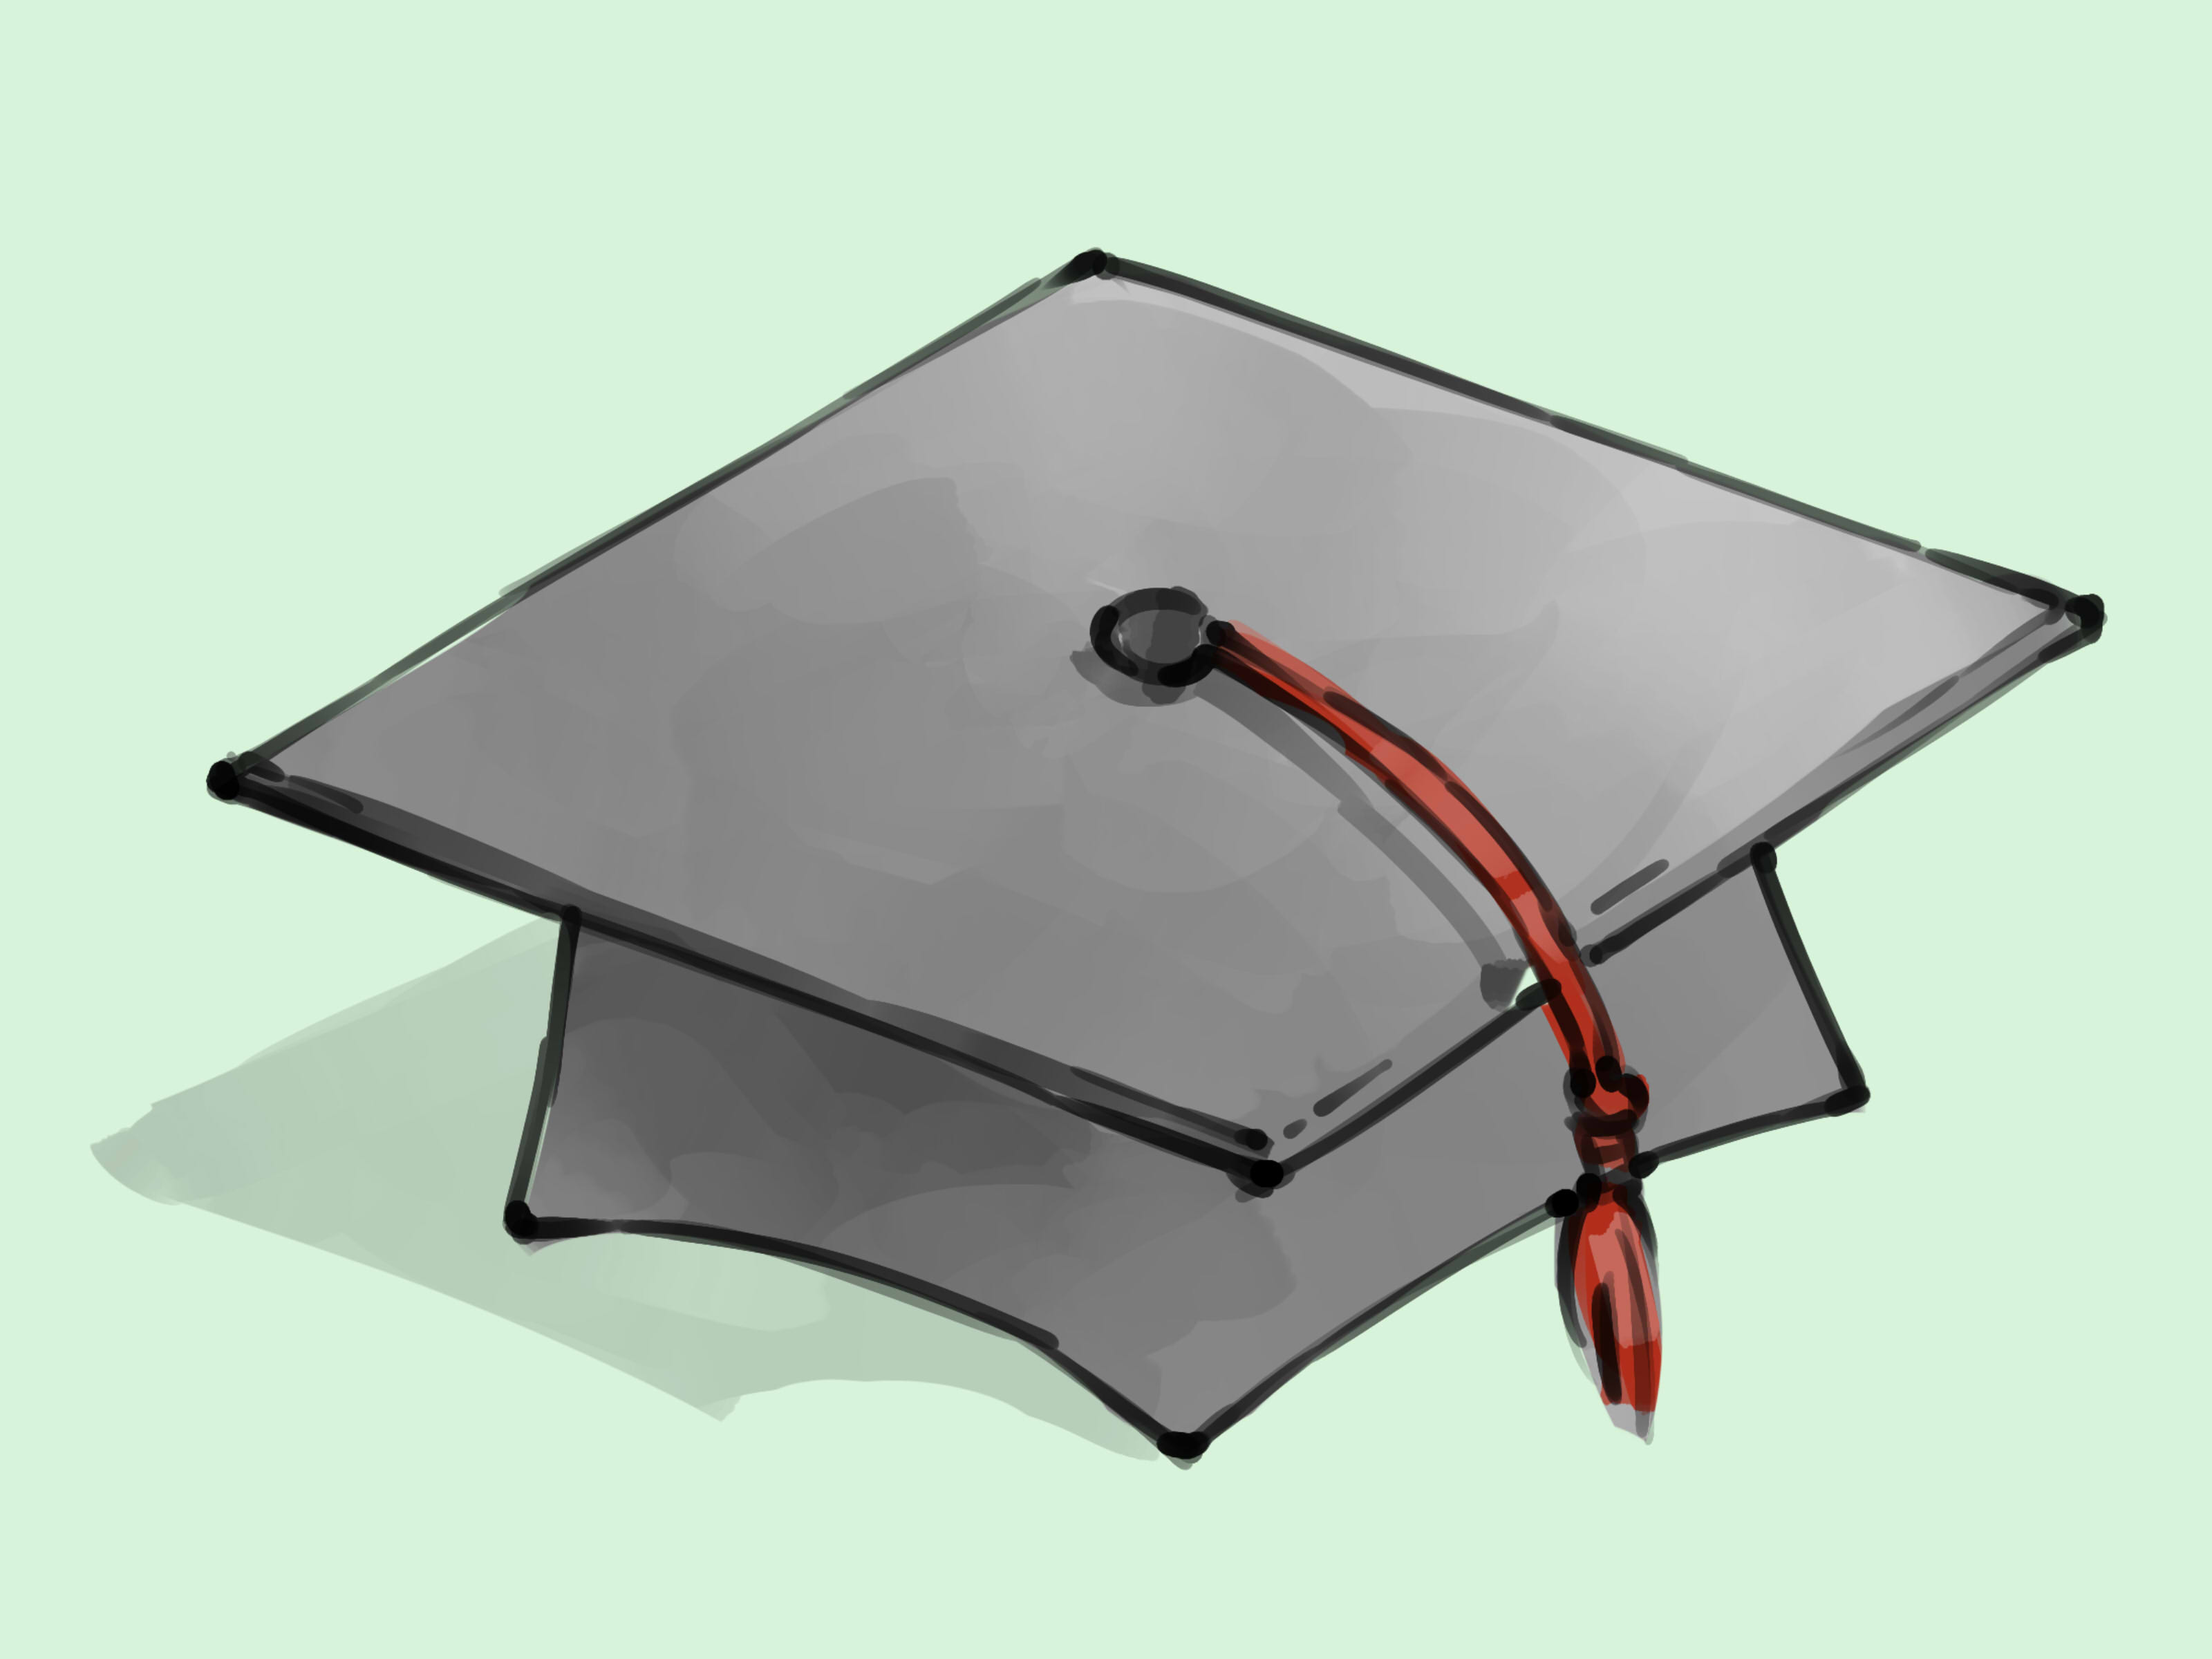 How to Draw a Graduation Cap: 5 Steps (with Pictures) - wikiHow